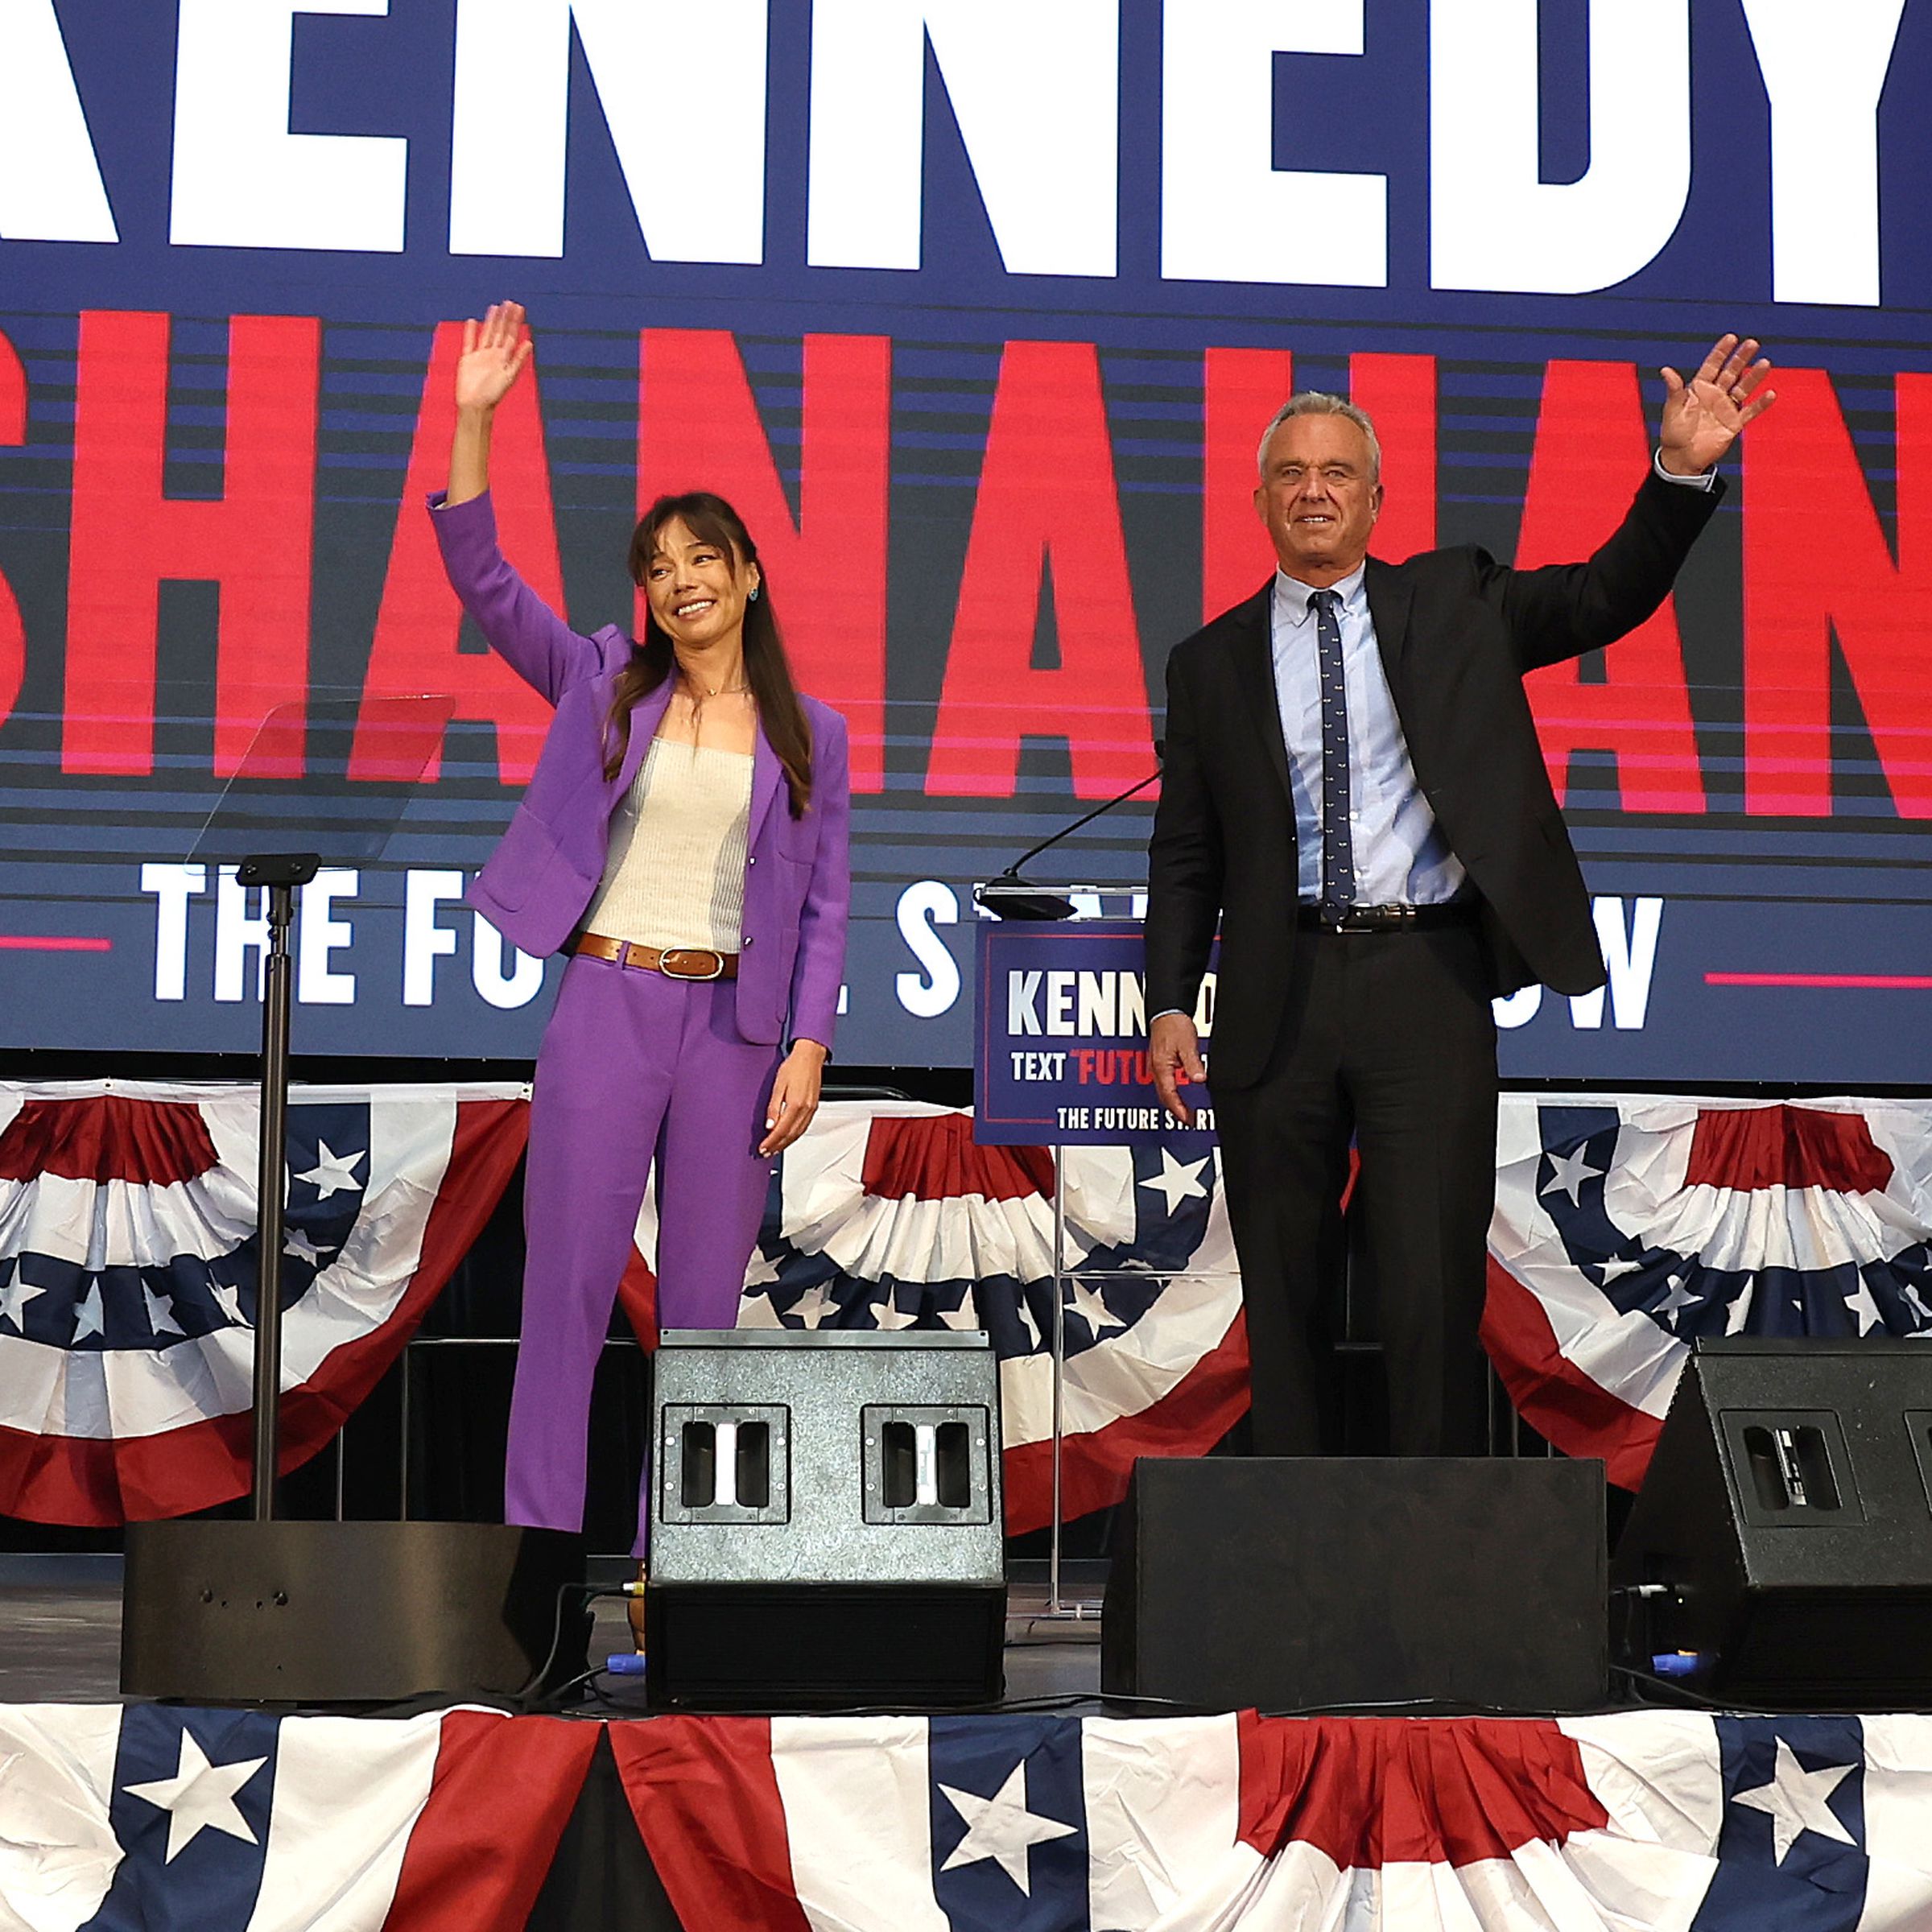 Independent presidential candidate Robert F. Kennedy Jr. (R) and his vice presidential pick Nicole Shanahan take the stage during a campaign event to announce his pick for a running mate at the Henry J. Kaiser Event Center on March 26th, 2024, in Oakland, California.